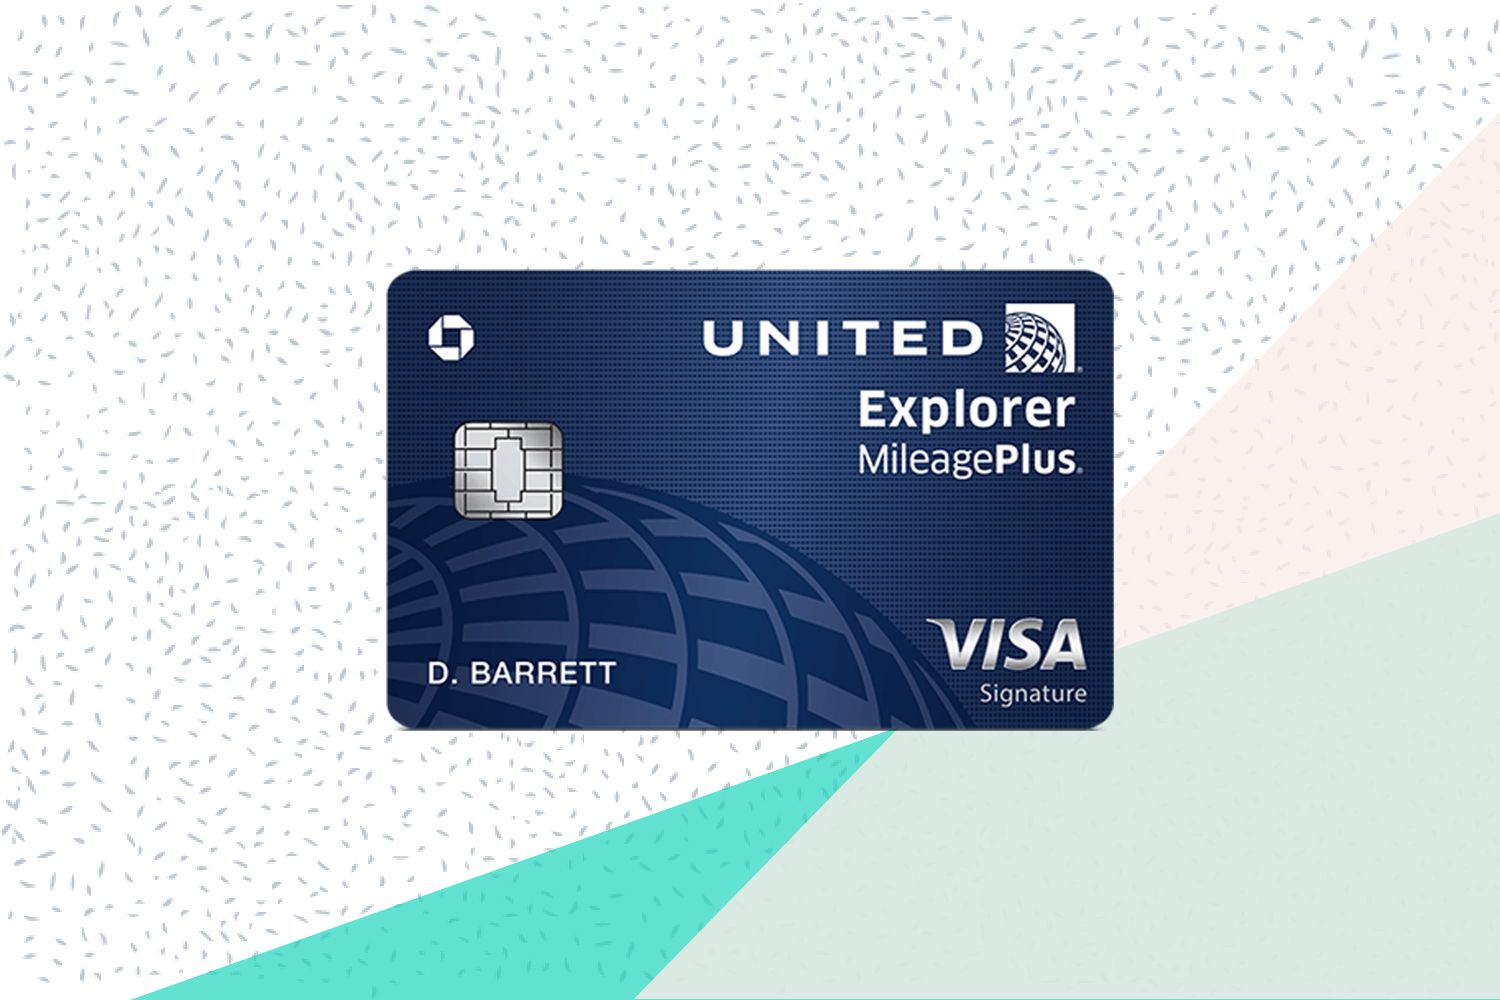 United Explorer Credit Card - Learn About the Benefits and How to Apply